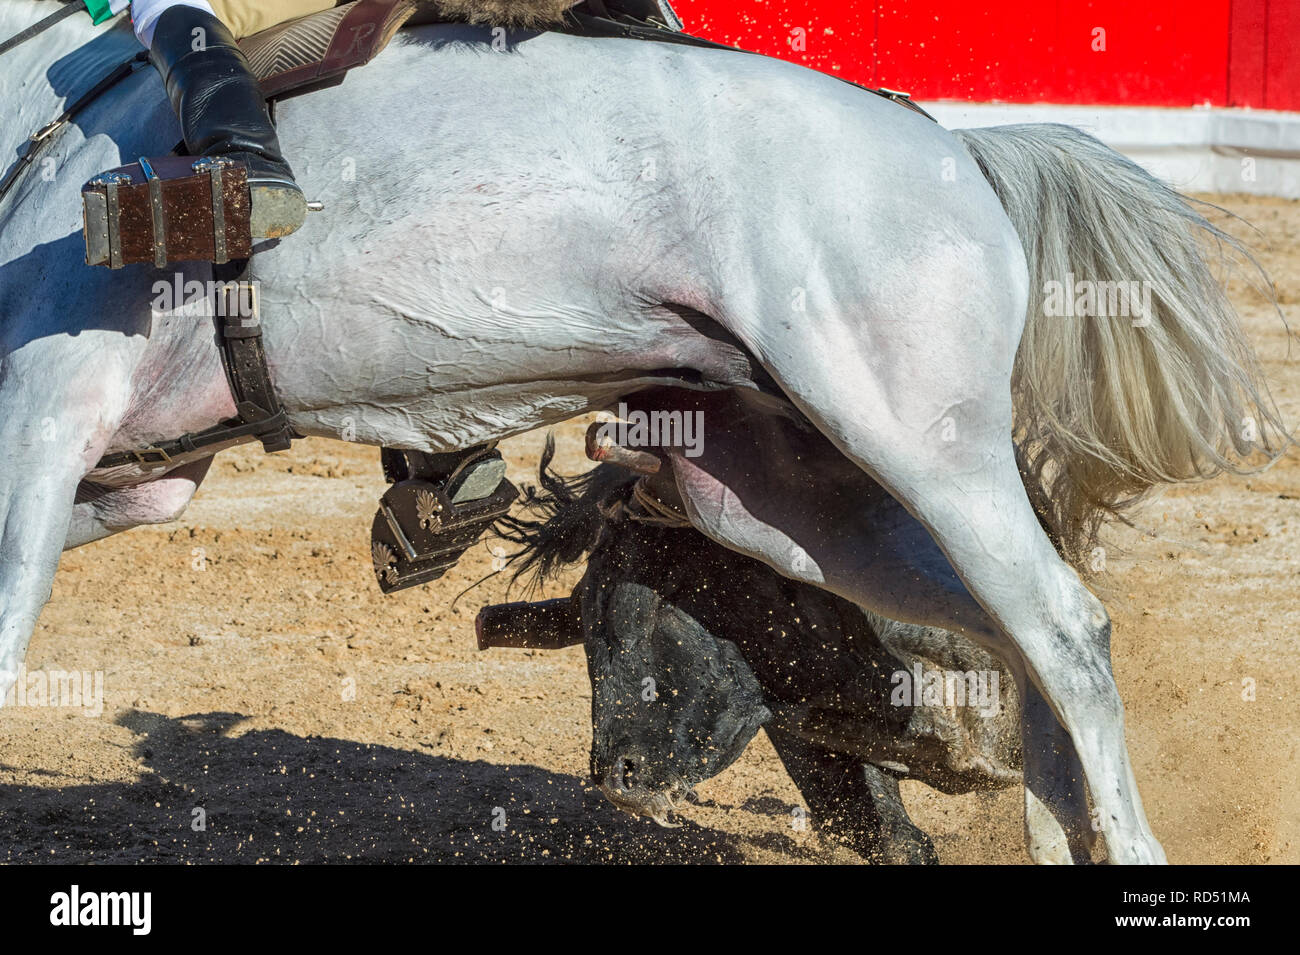 Bullfight in Alcochete. Horseman fighting the bull from his horse by making the bull run and chase the horse, Bulls are not killed during the bullfigh Stock Photo